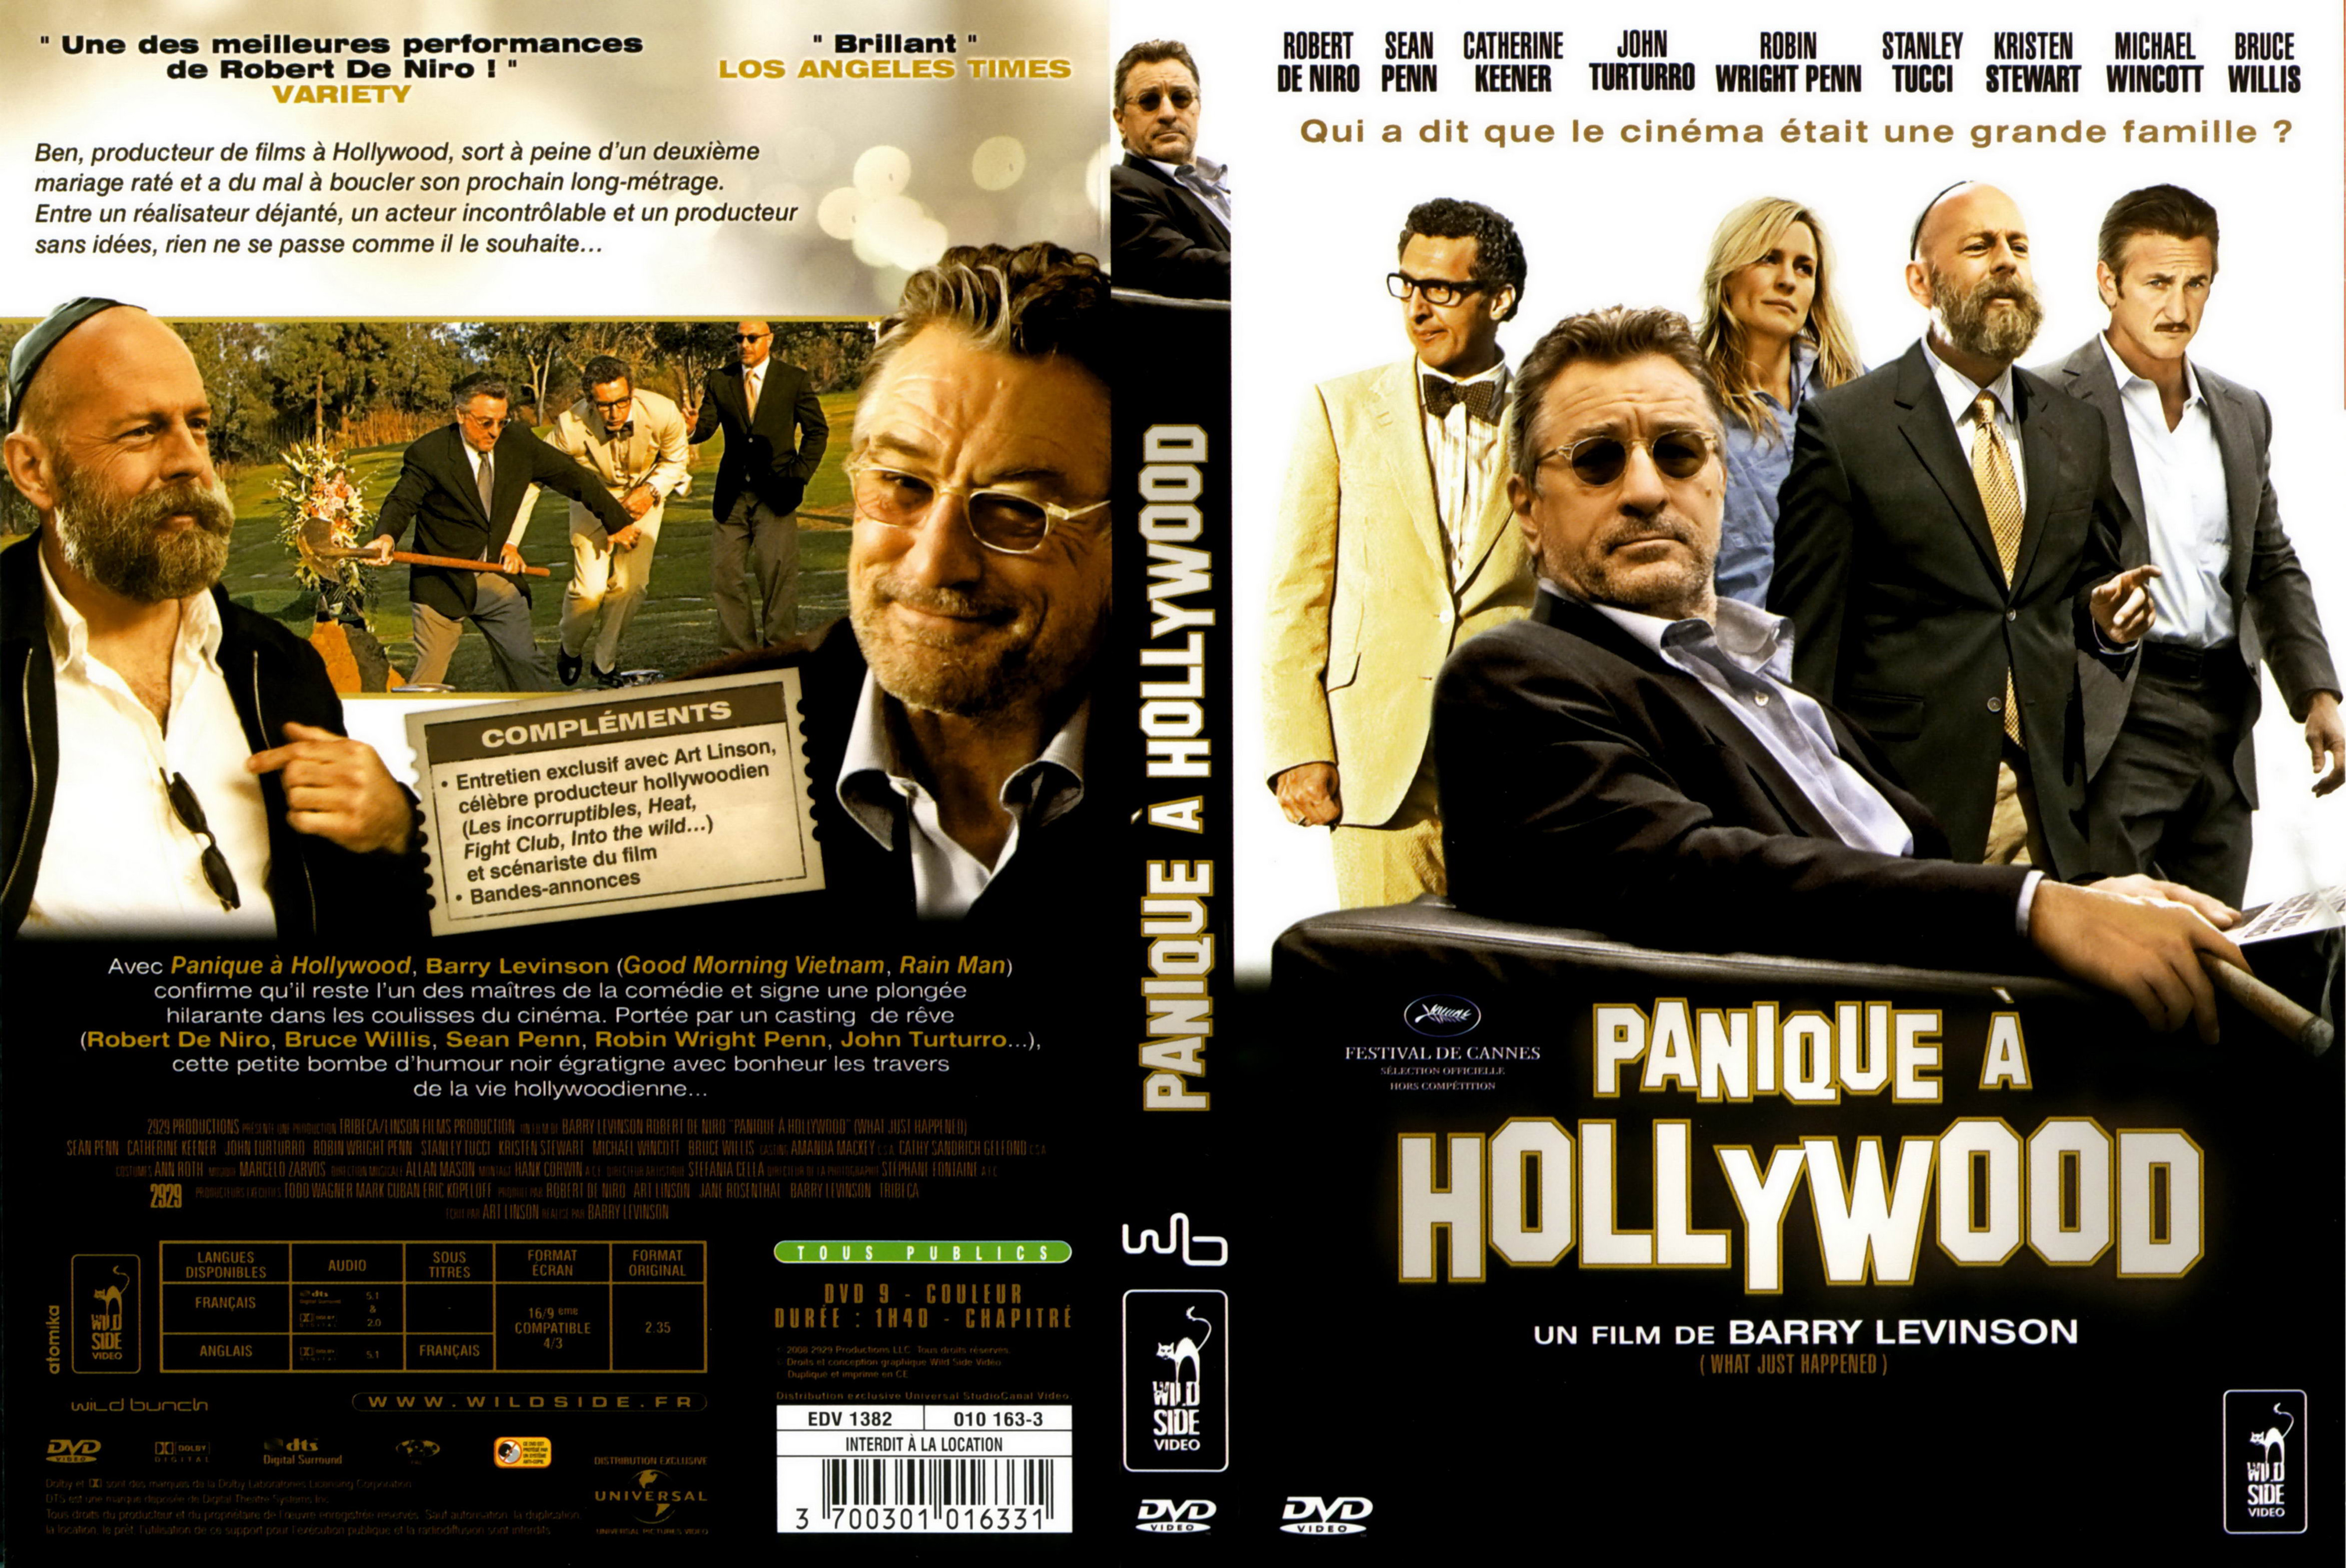 Jaquette DVD Panique  hollywood